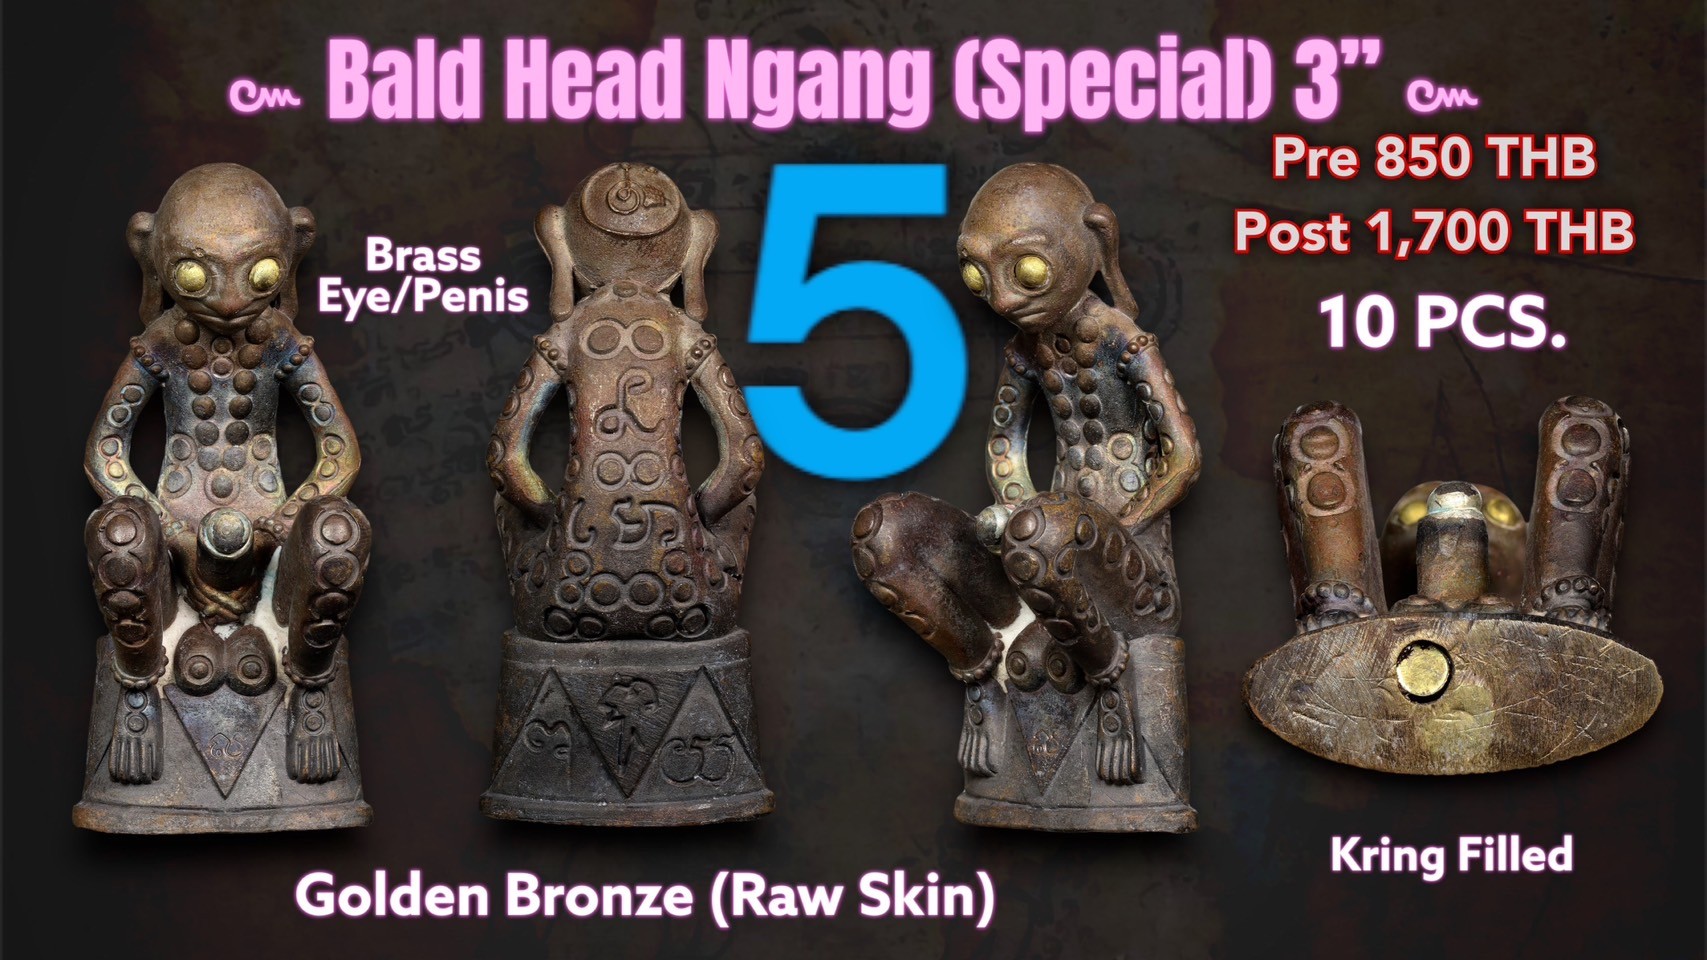 5.Bald Head Ngang Golden Bronze (Raw Skin) 3 inches